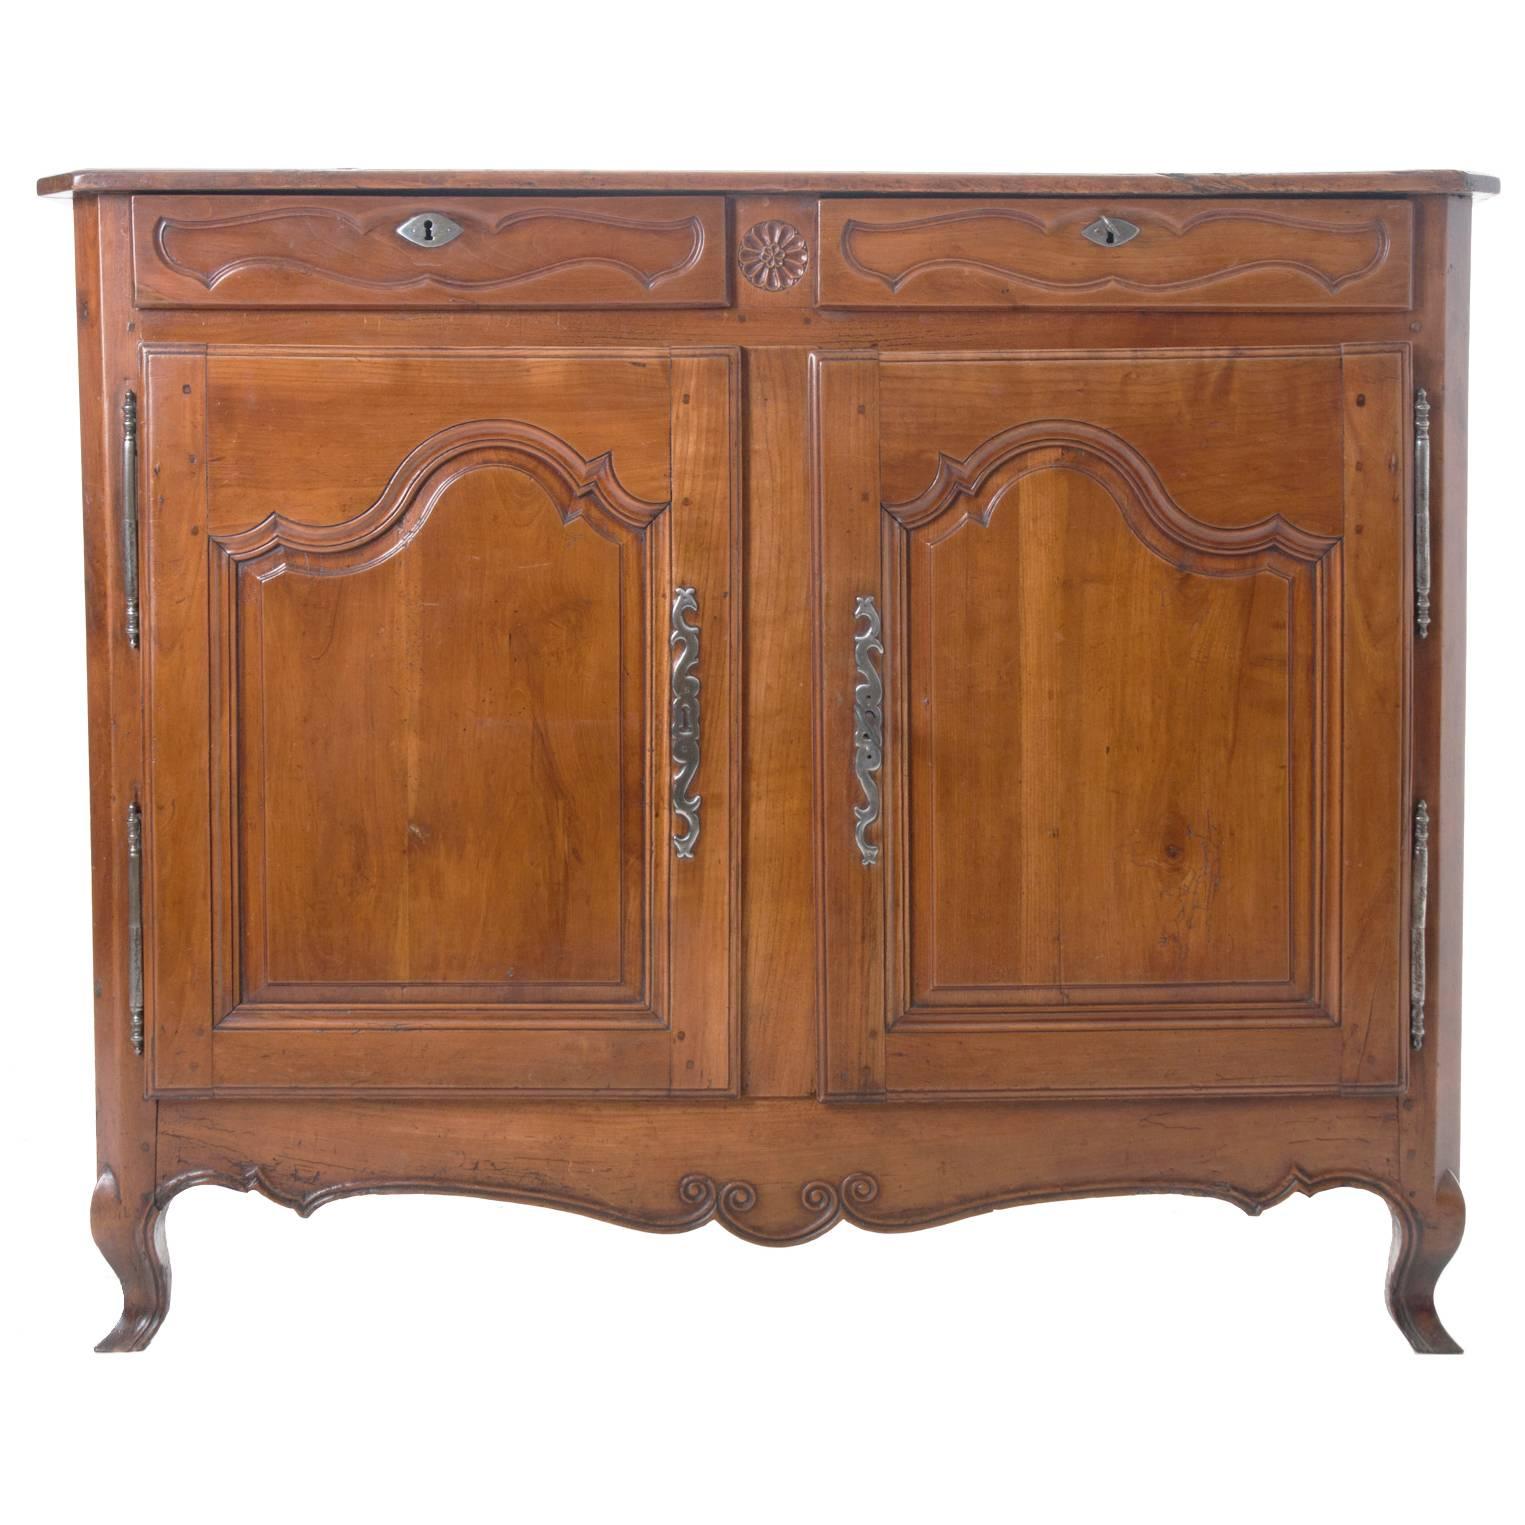 French 19th Century Provincial Cherry Buffet